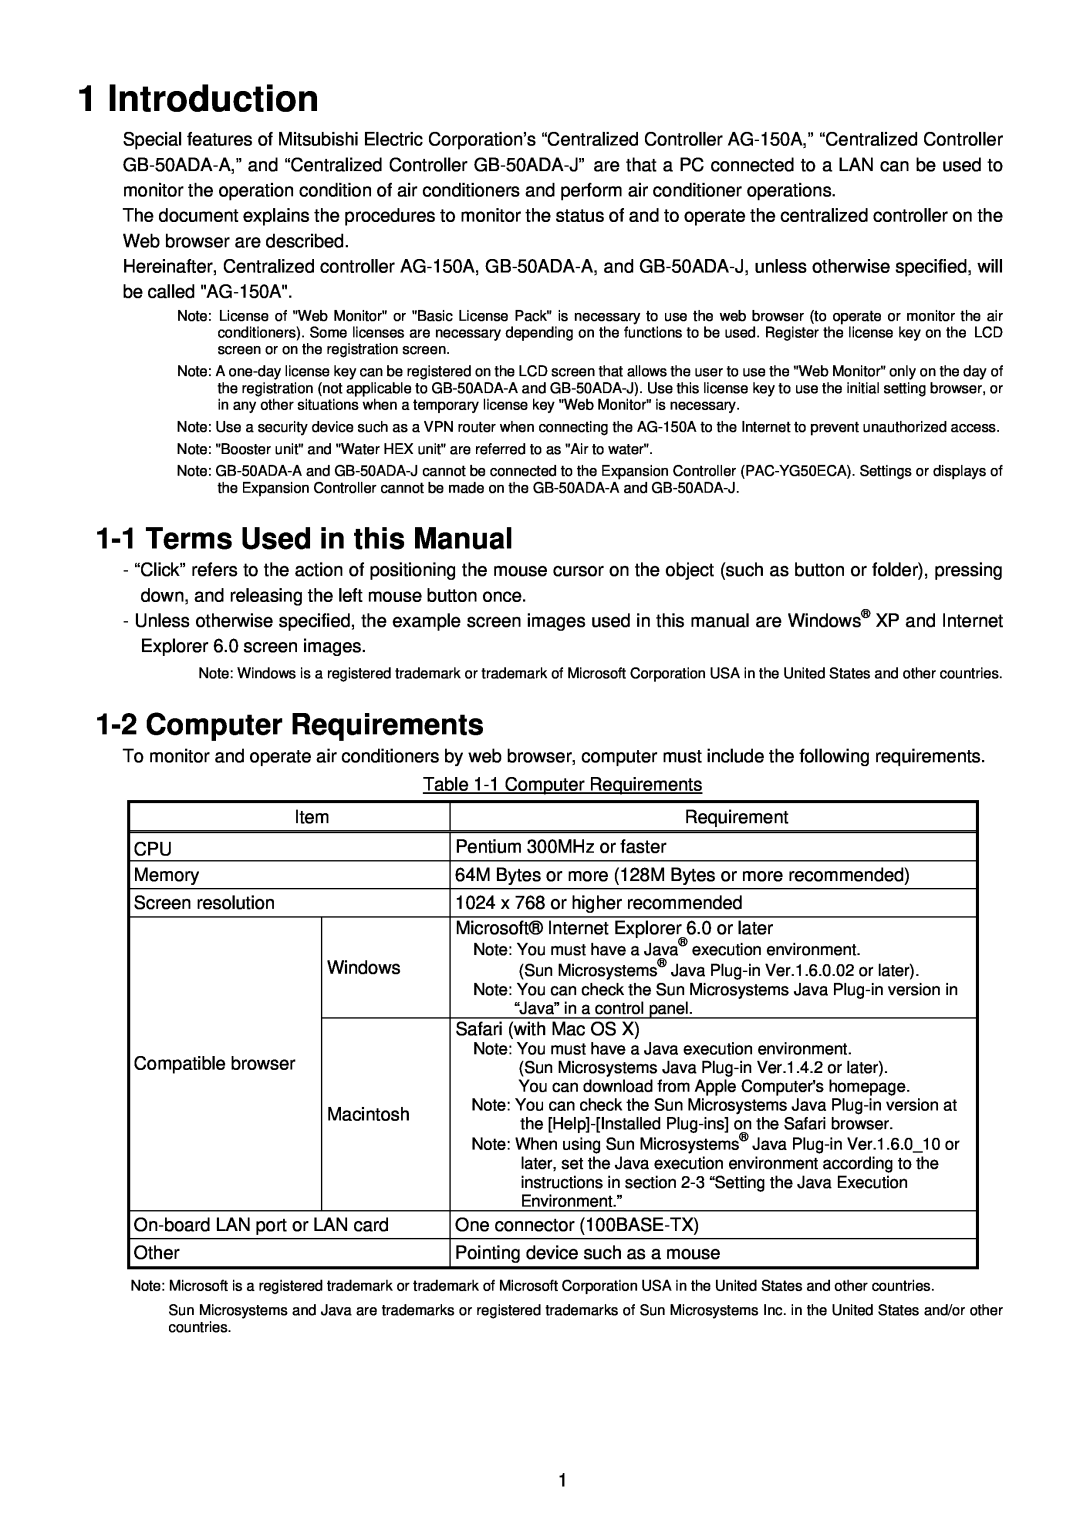 Mitsubishi Electronics GB-50ADA-J, AG-150A, GB-50ADA-A manual Introduction, Terms Used in this Manual, Computer Requirements 